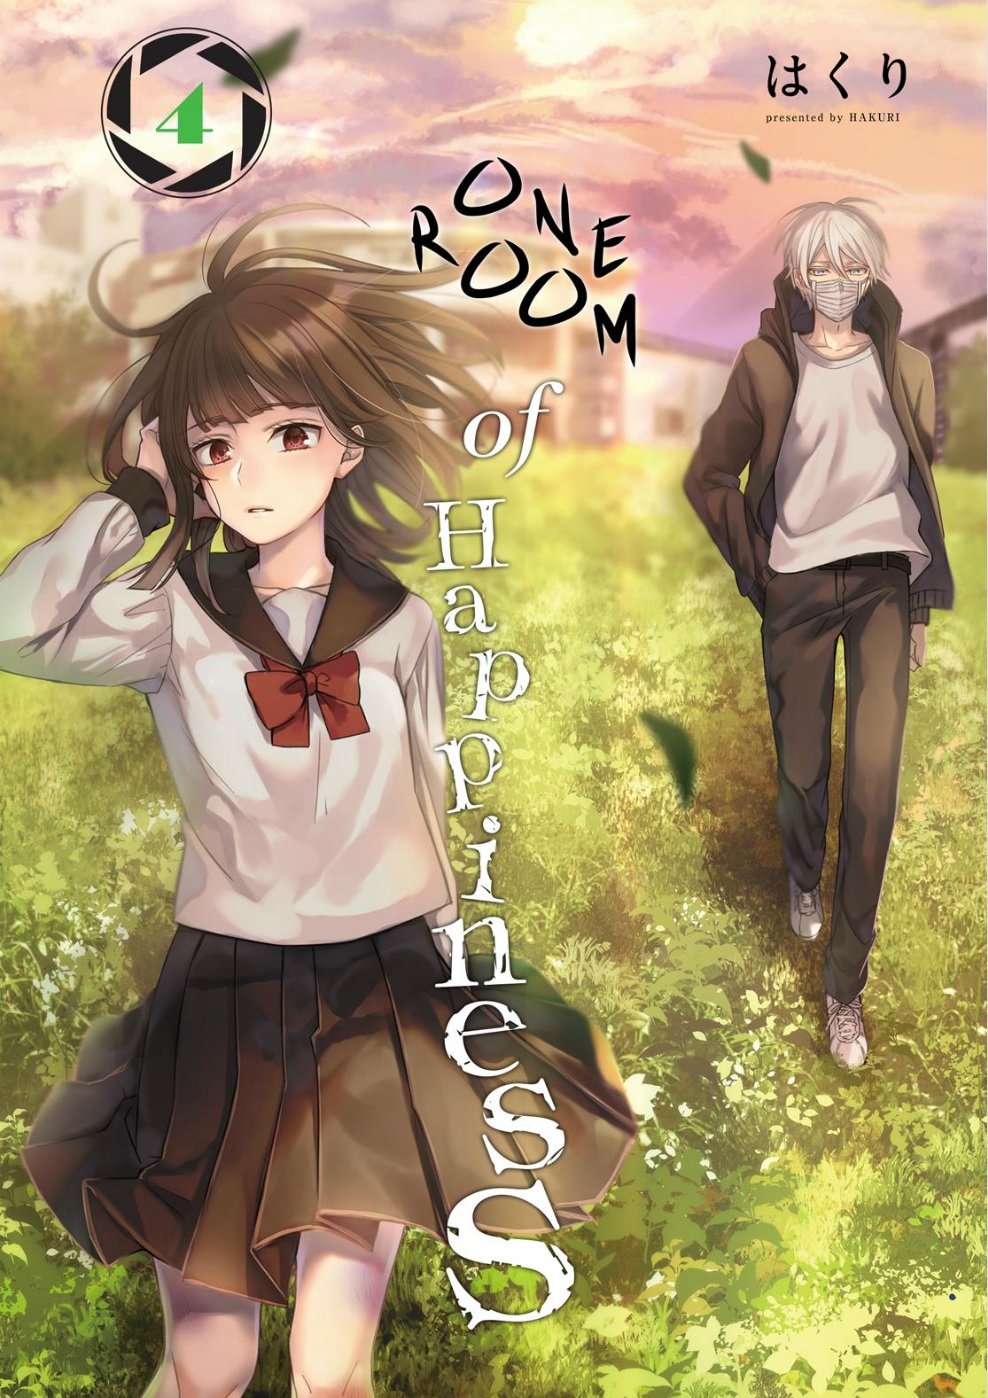 One Room of Happiness 02